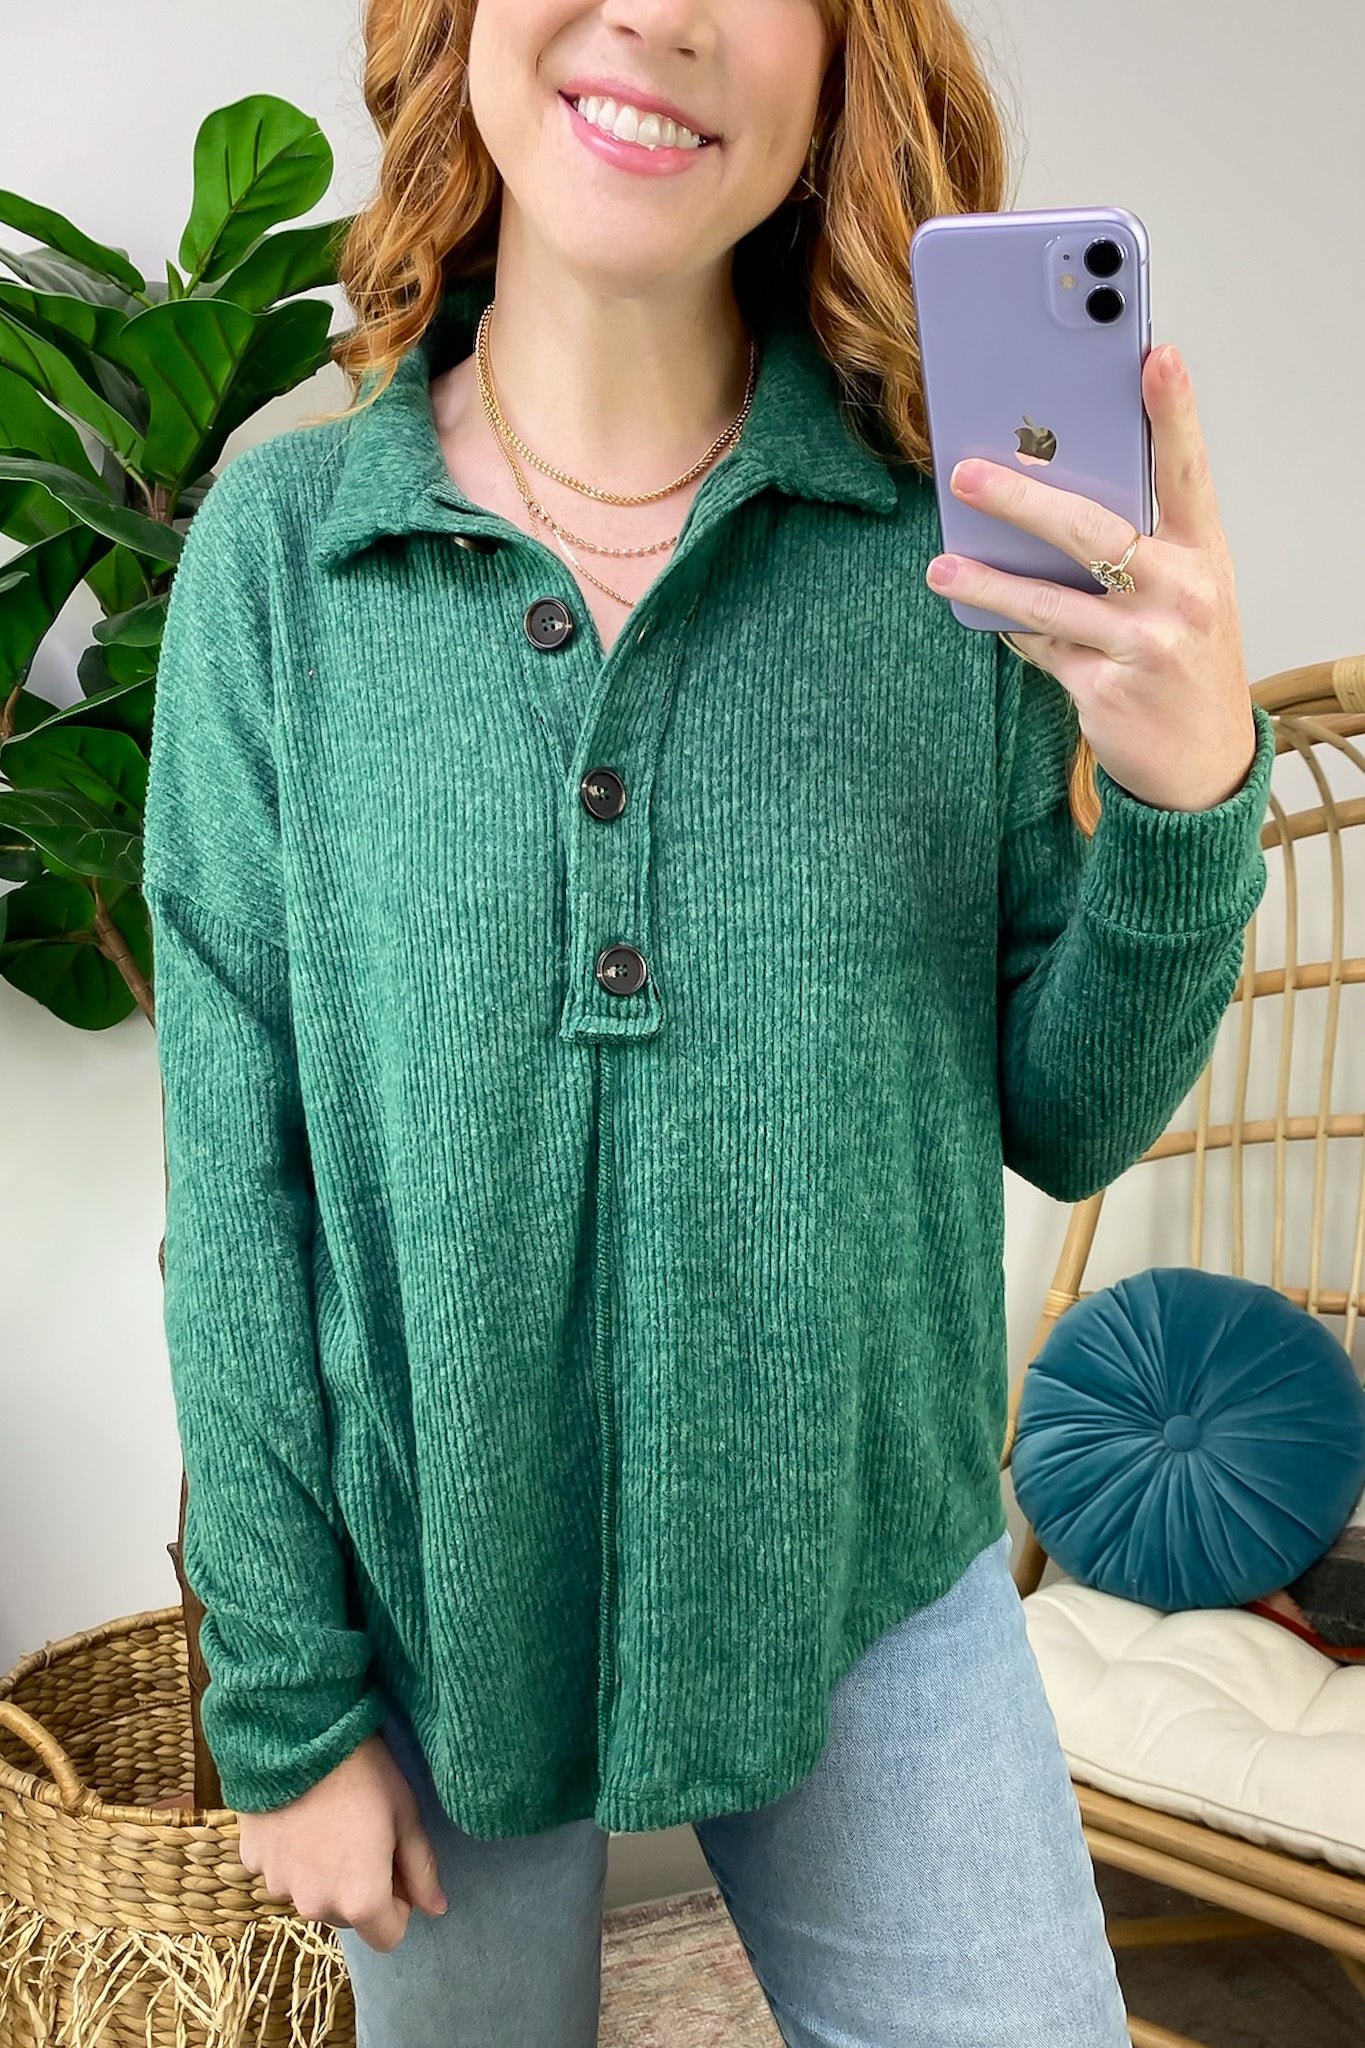  Snuggly Forecast Brushed Melange Collared Top - FINAL SALE - Madison and Mallory